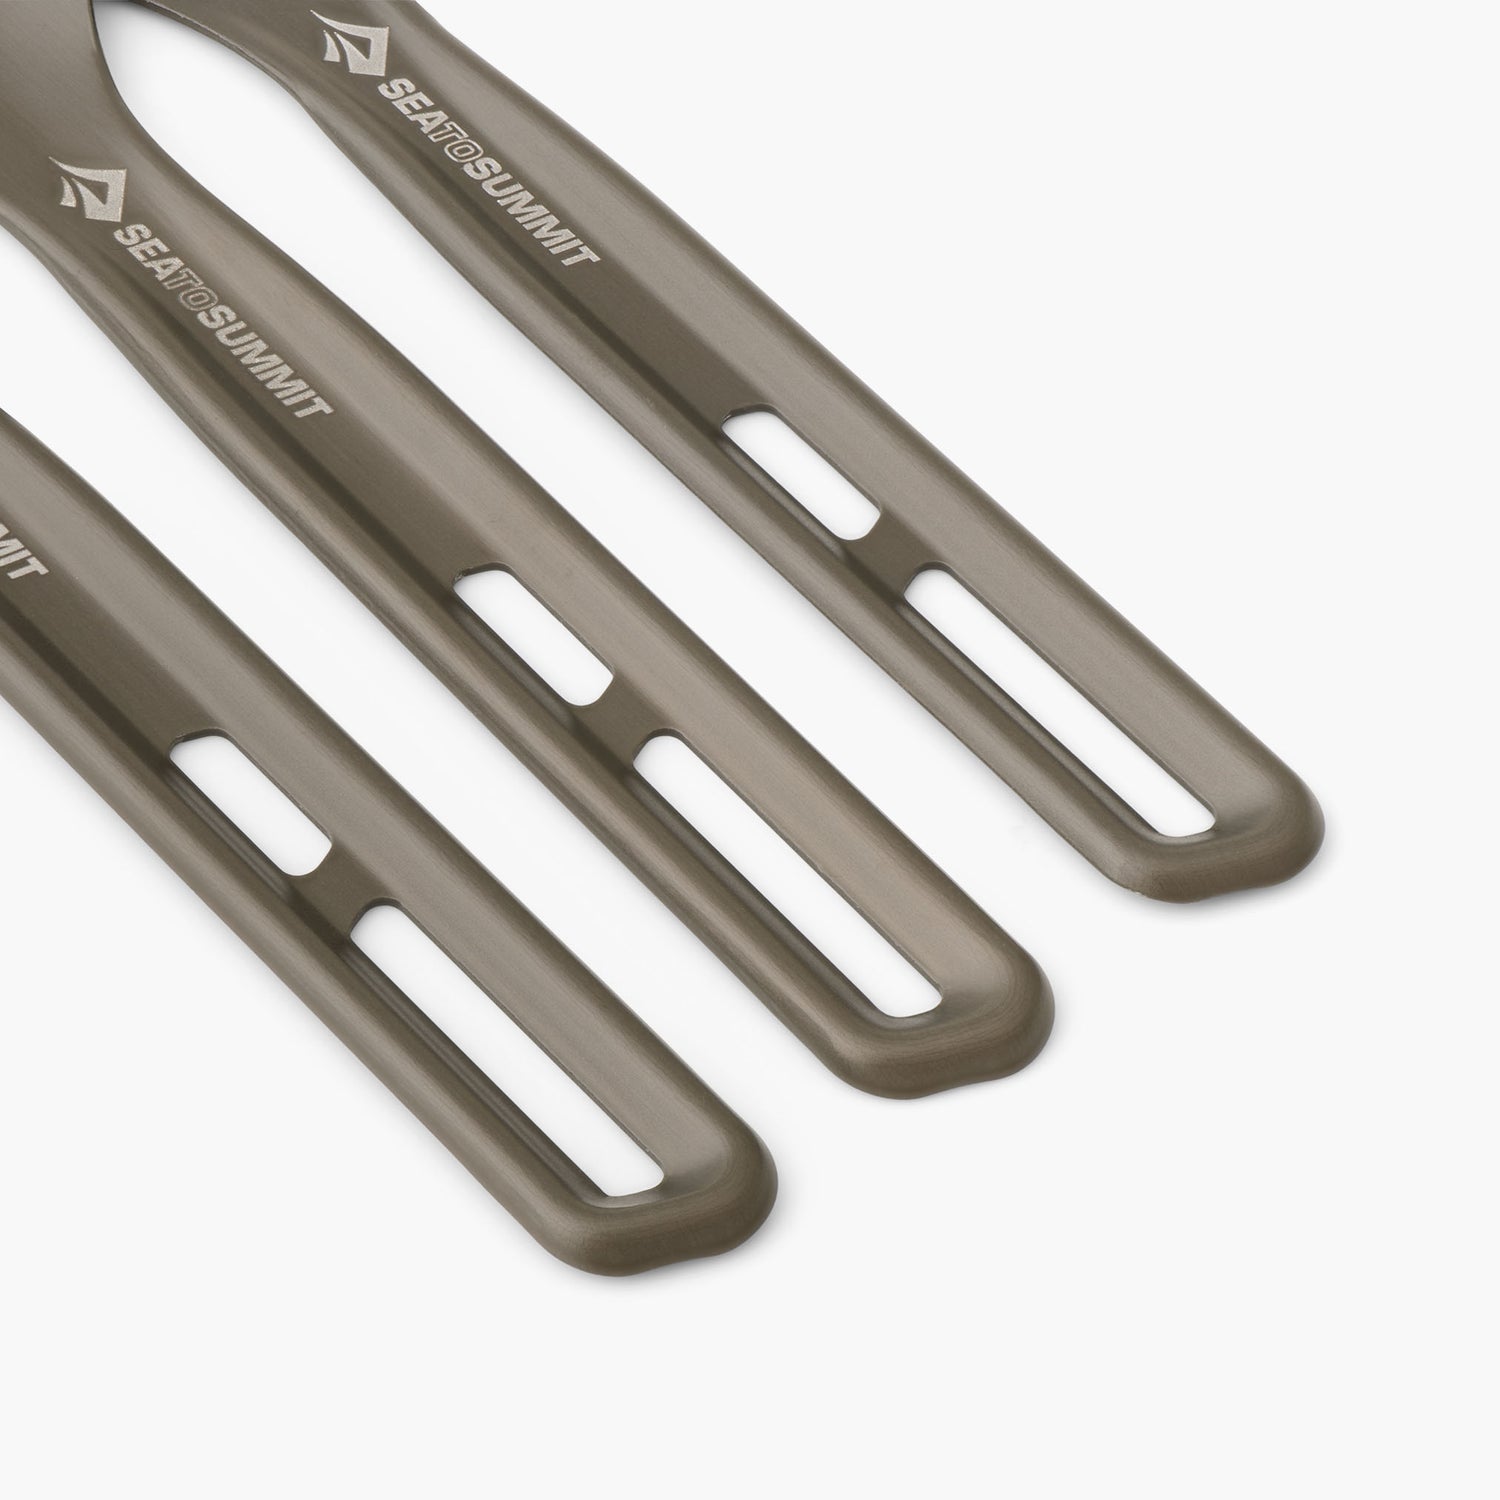 Frontier Ultralight Knife, Fork and Spoon Set